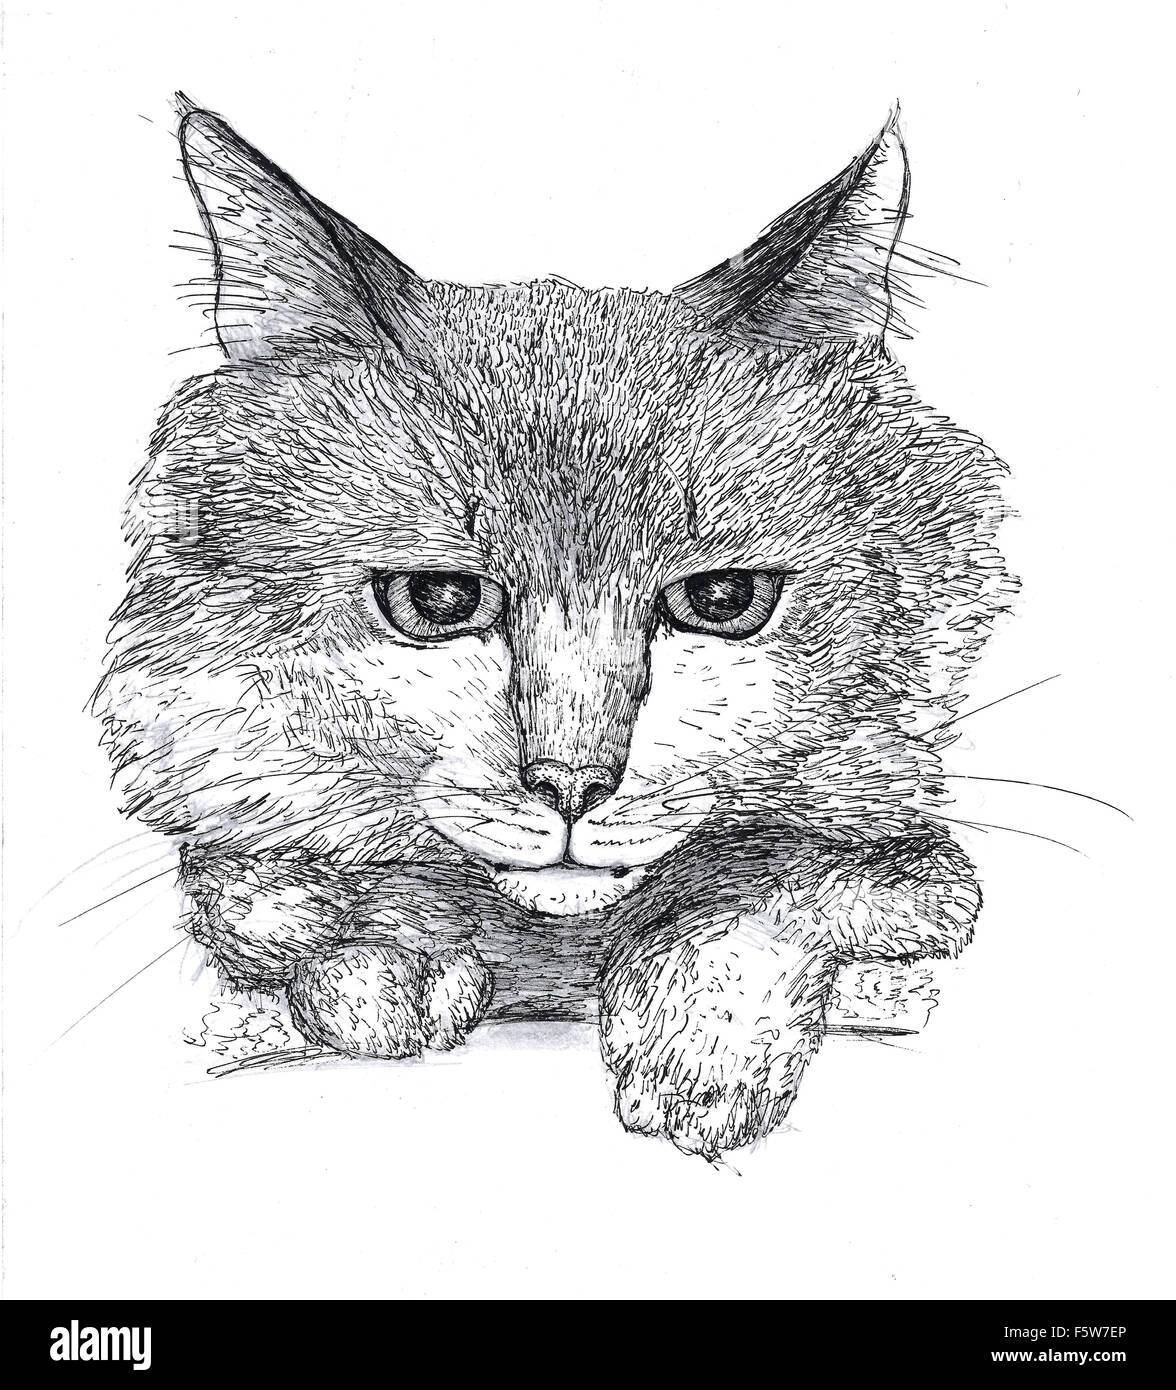 Sketch of a cat Stock Photo